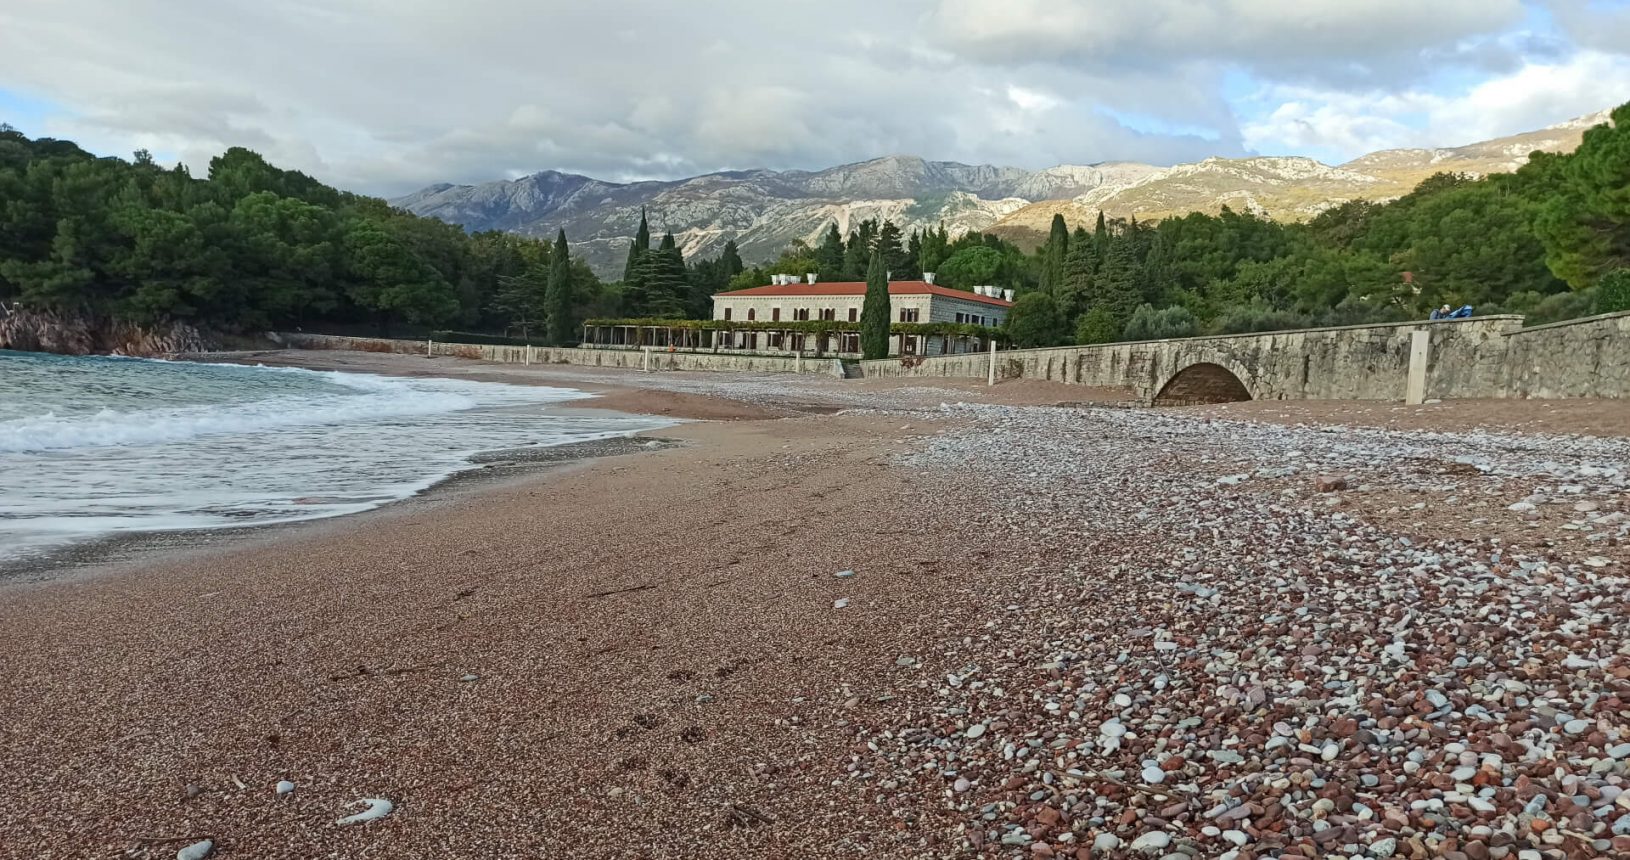 Queen beach and king residence in Park Milocer